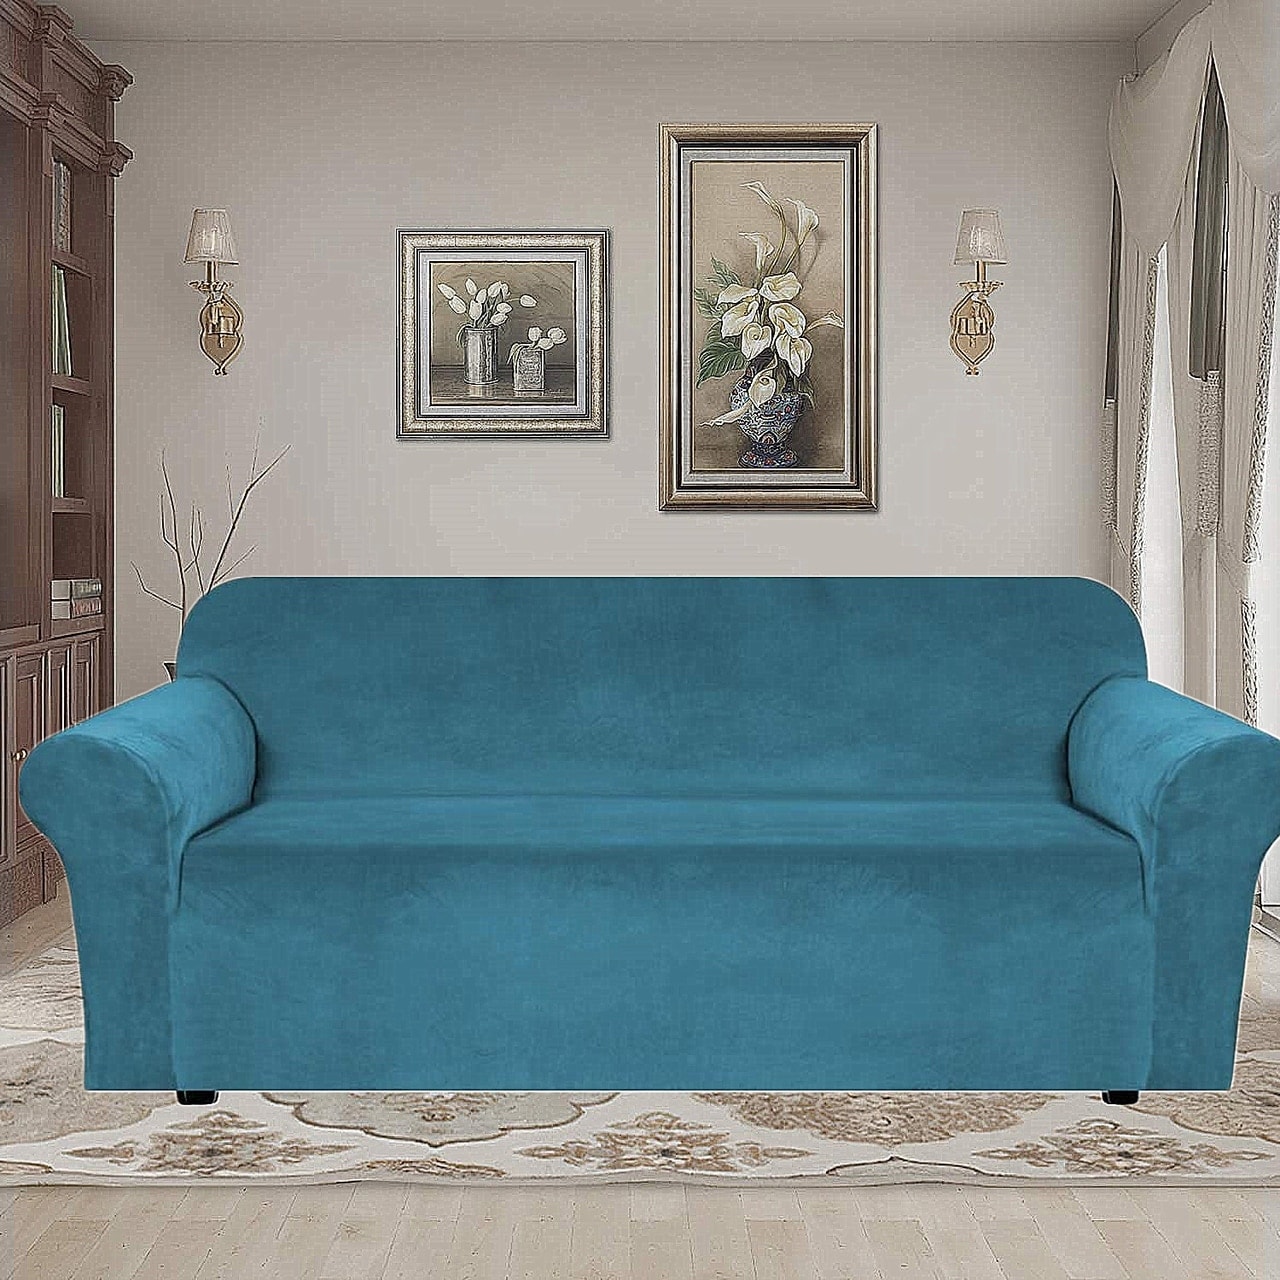 Stretch Slipcover Sofa Cover Cushion Couch Pillow Case Furniture Decoration 